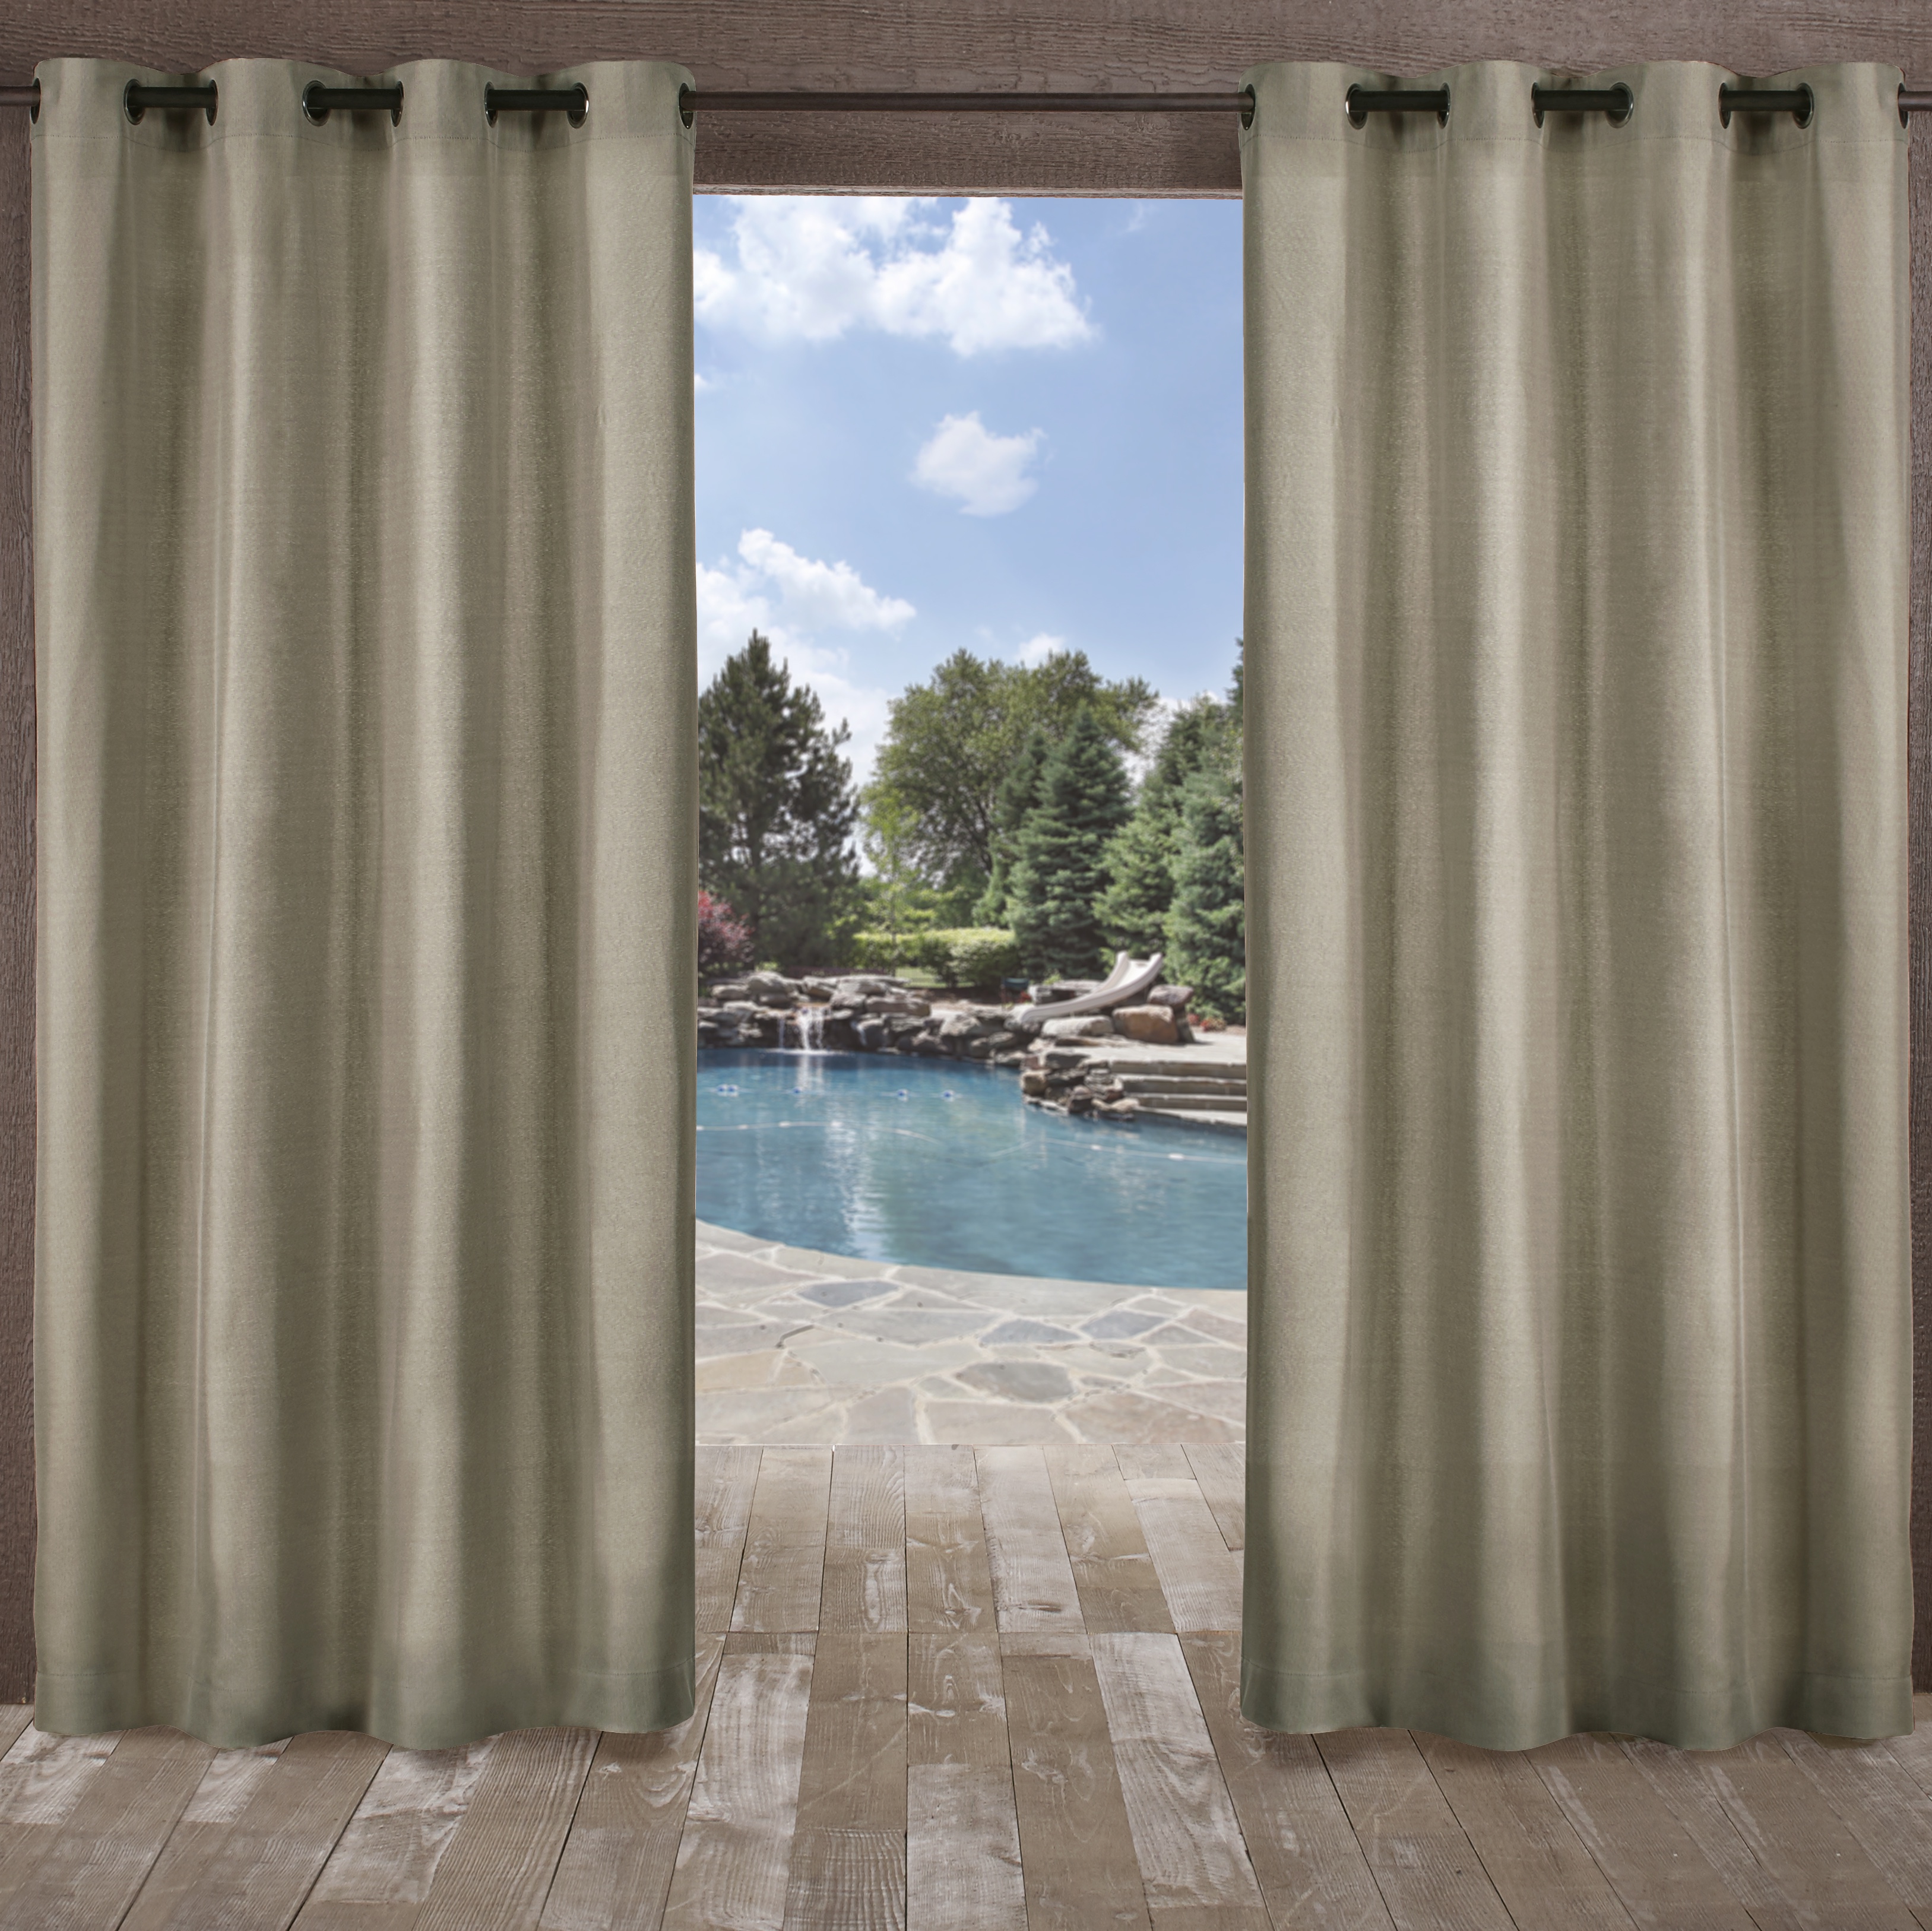 Exclusive Home Biscayne Indoor/Outdoor Two Tone Textured Grommet Top Curtain Panel Pair, 54"x108", Natural - image 1 of 6